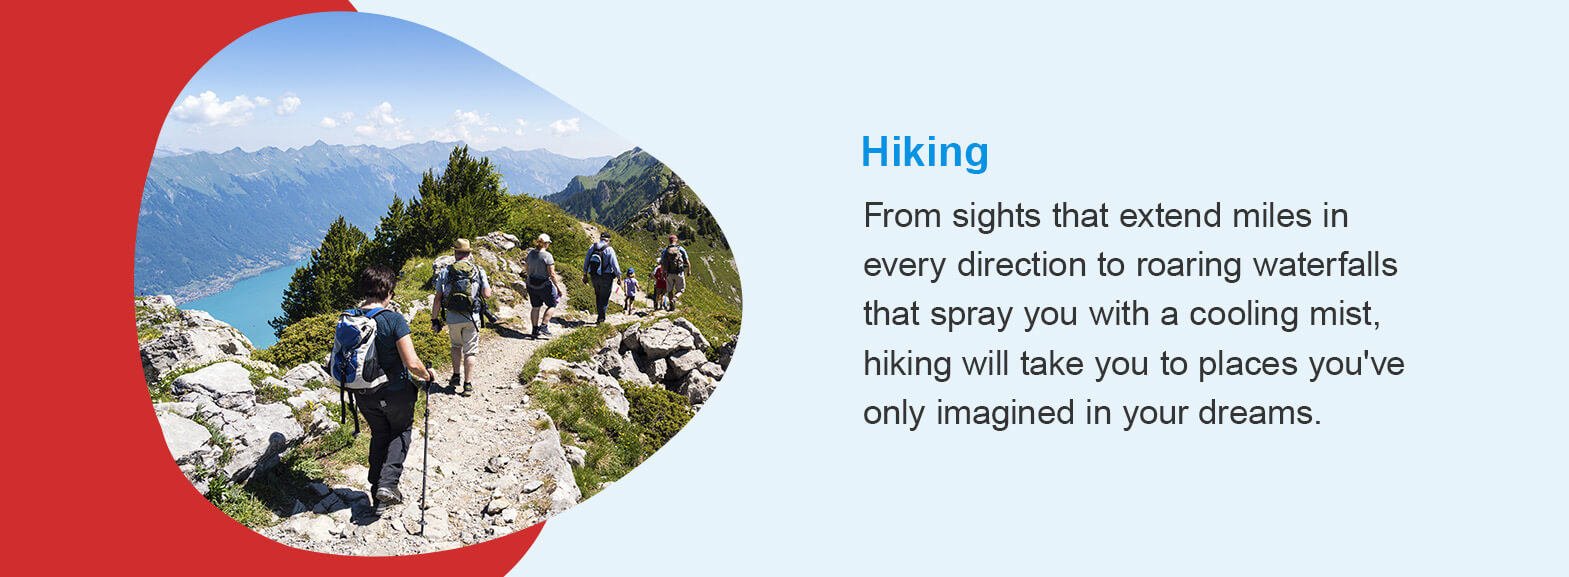 Hiking - From sights that extend miles in every direction to roaring waterfalls that spray you with a cooling mist, hiking will take you to places you've only imagined in your dreams. 